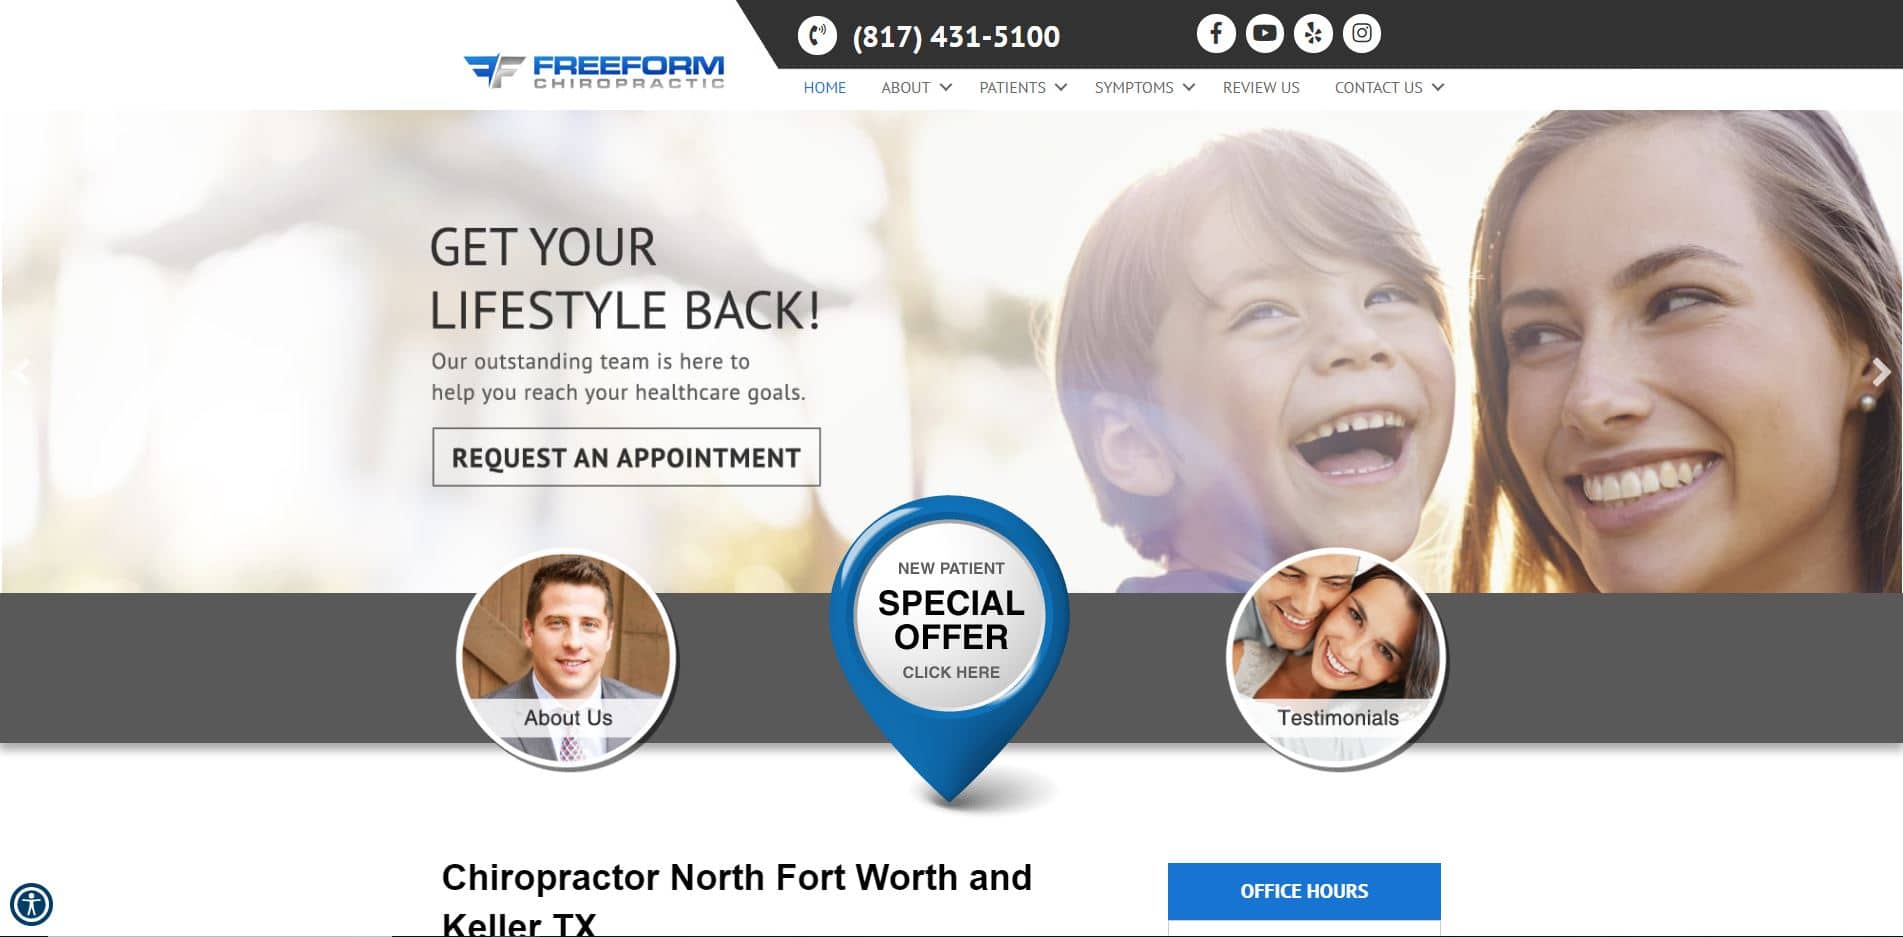 Chiropractor in Fort Worth